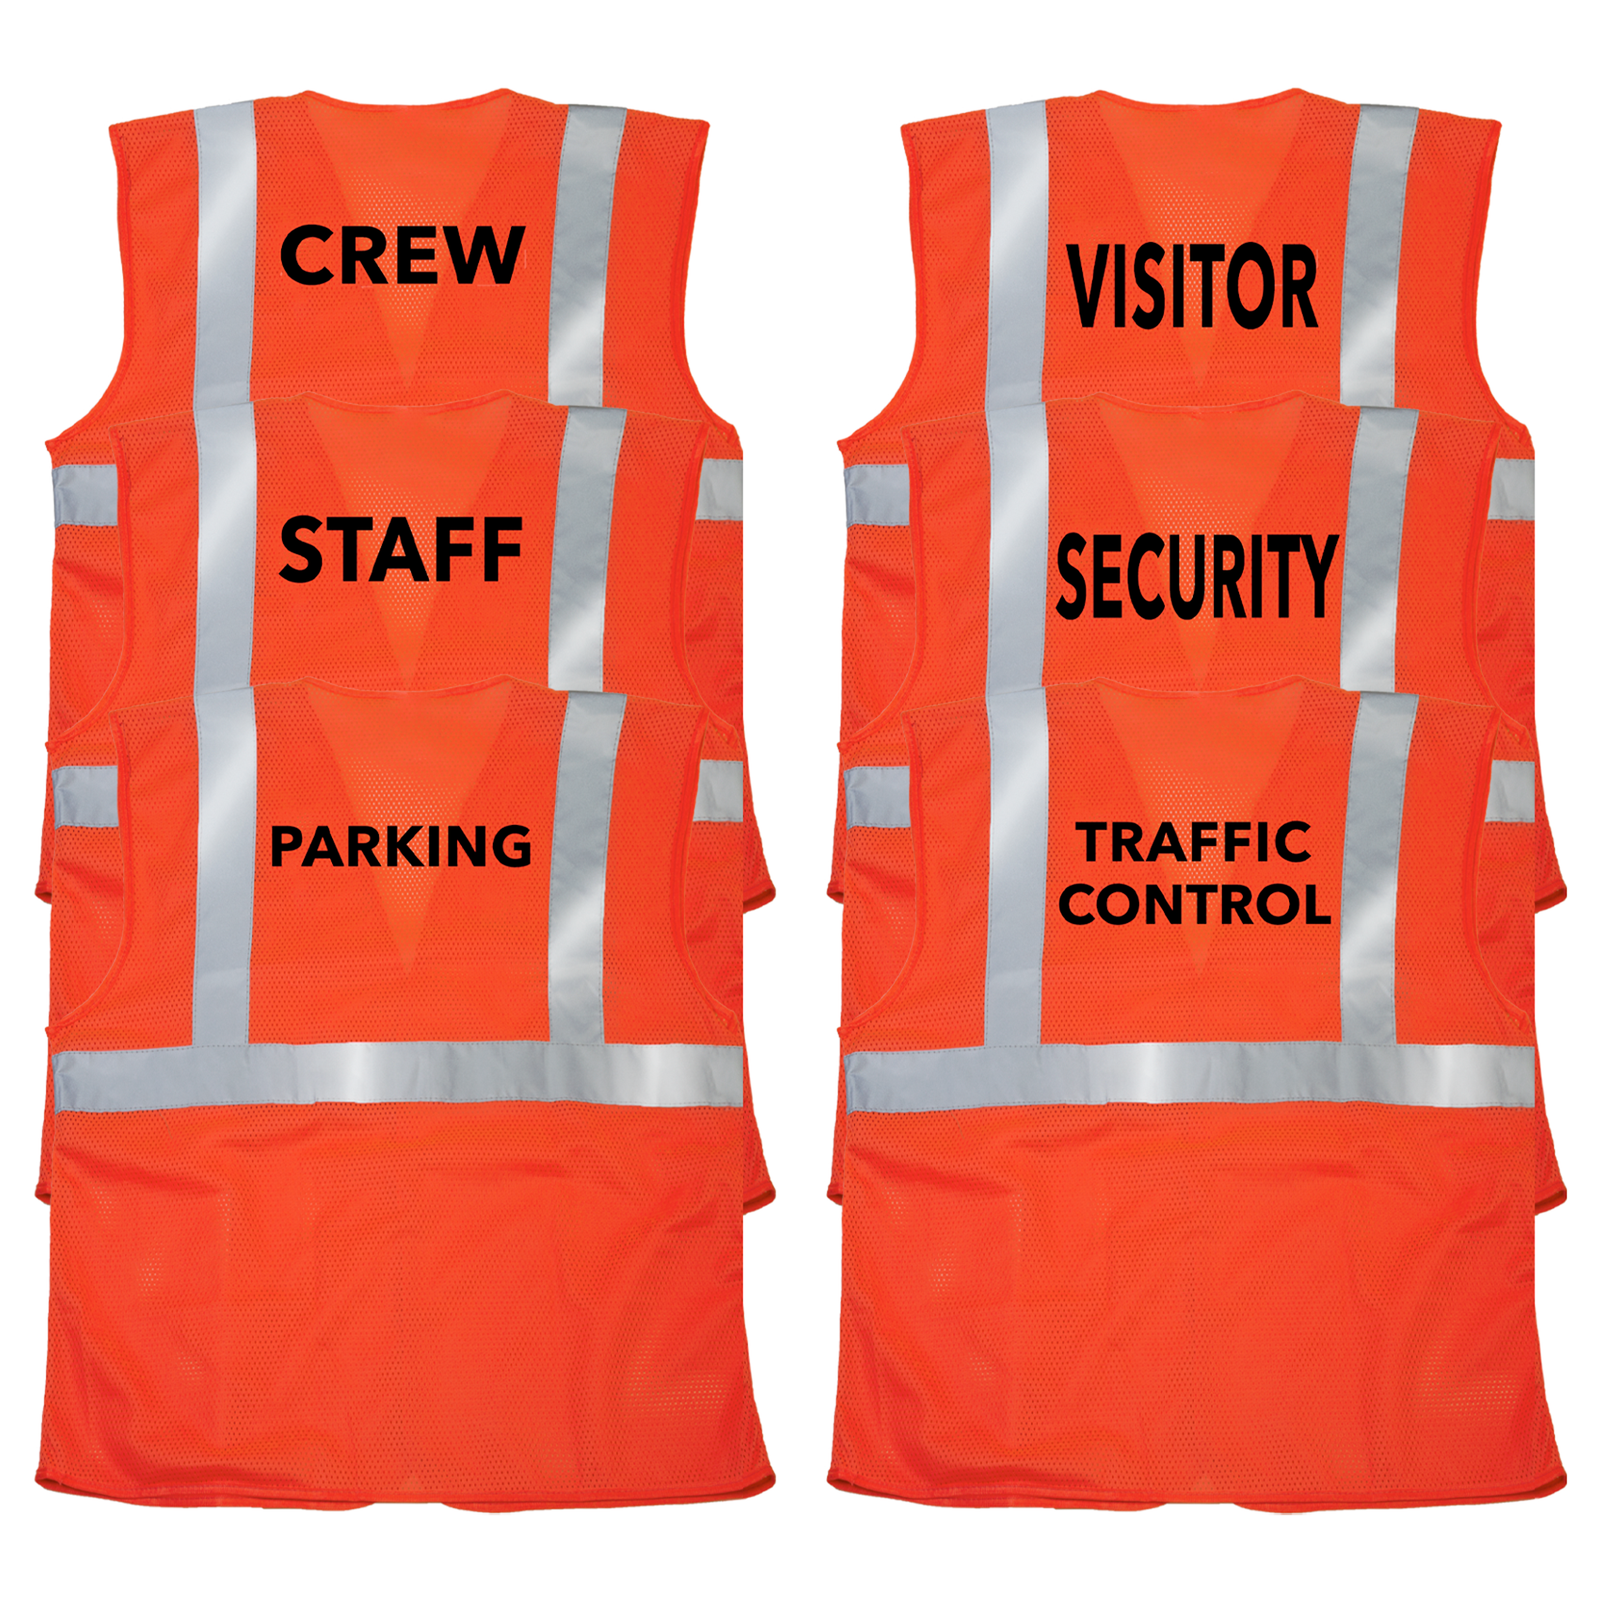 Yellow Hi Vis Vest - Brook Hivis - Fast UK Delivery - Cheap Price